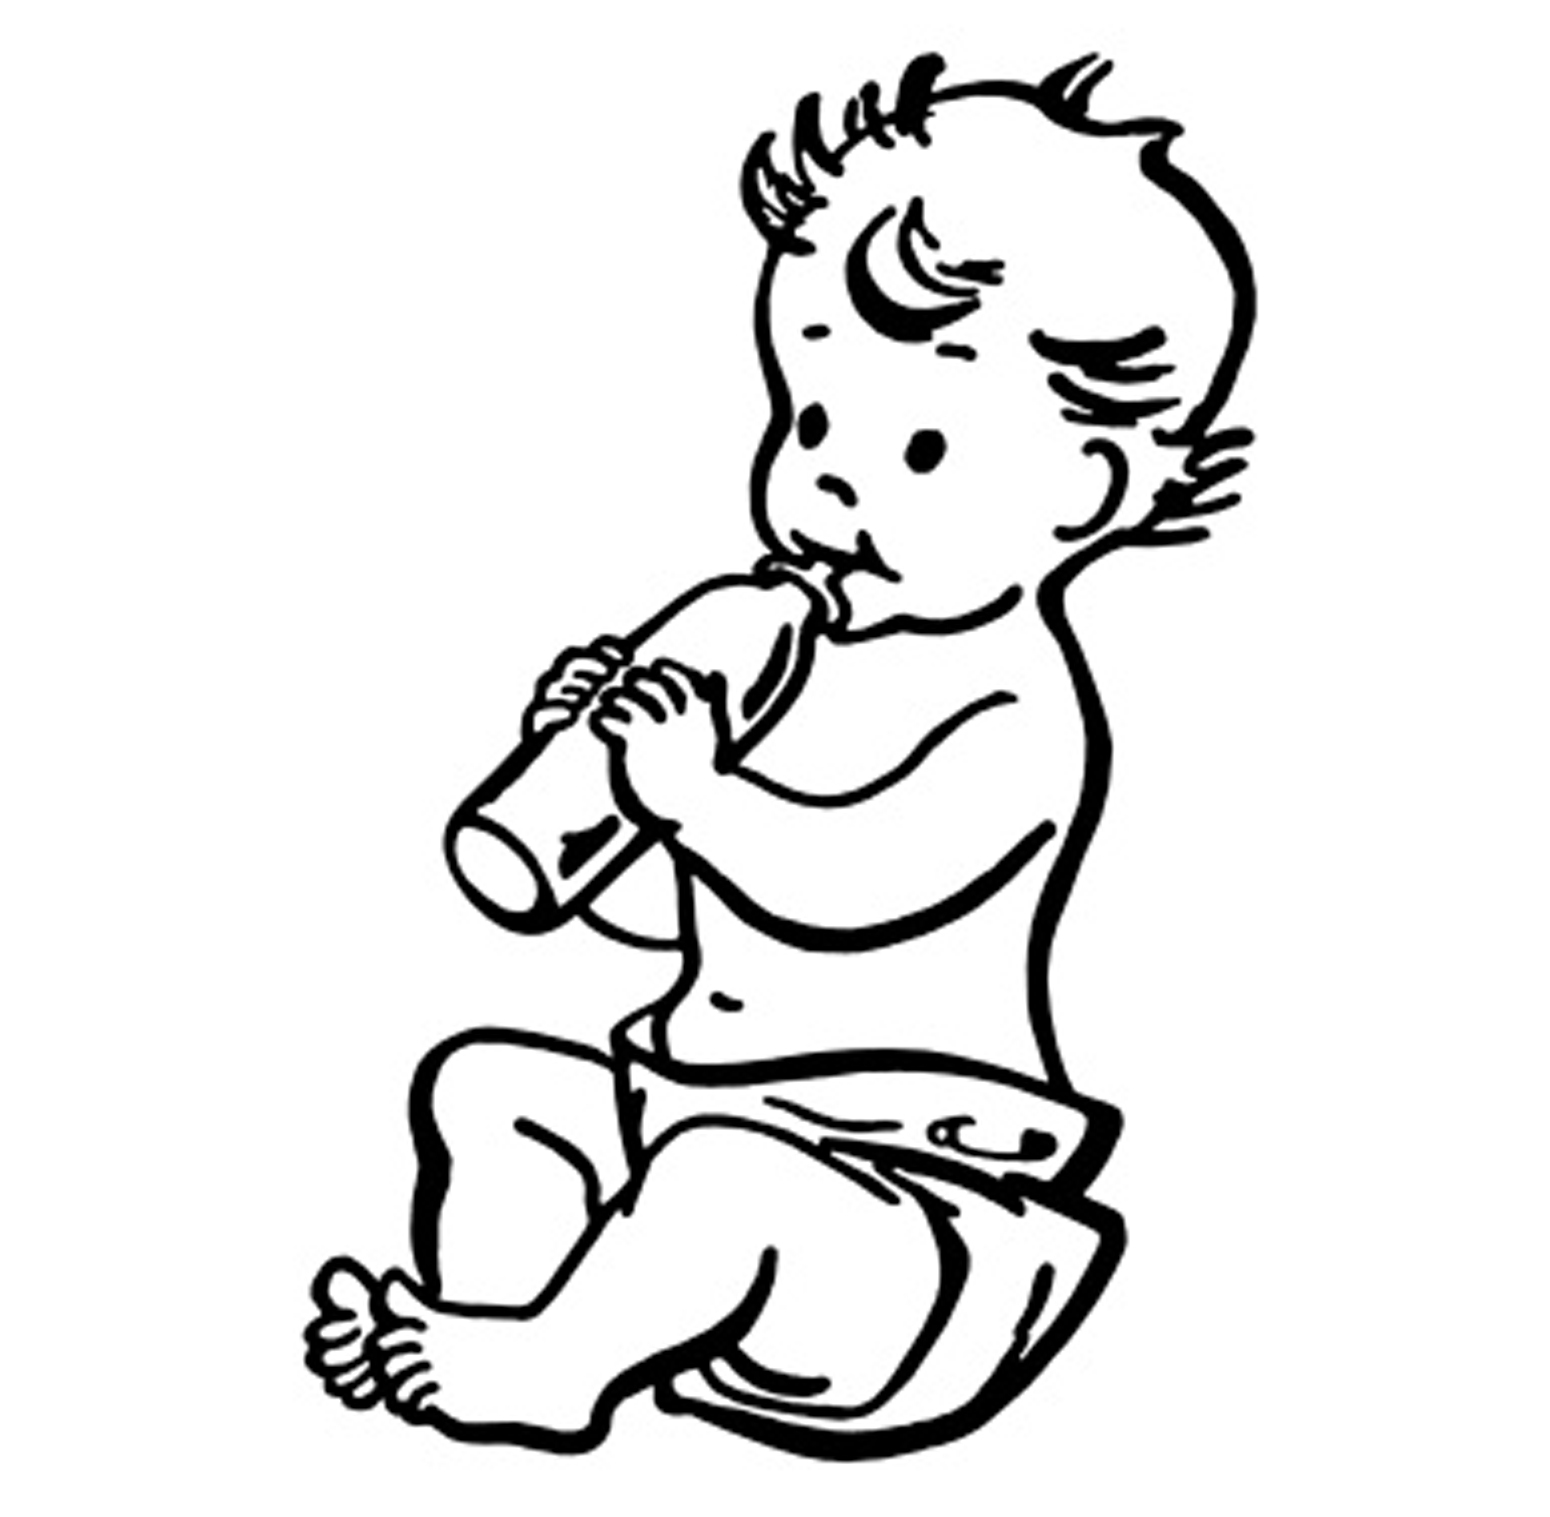 Black And White Baby Clipart.